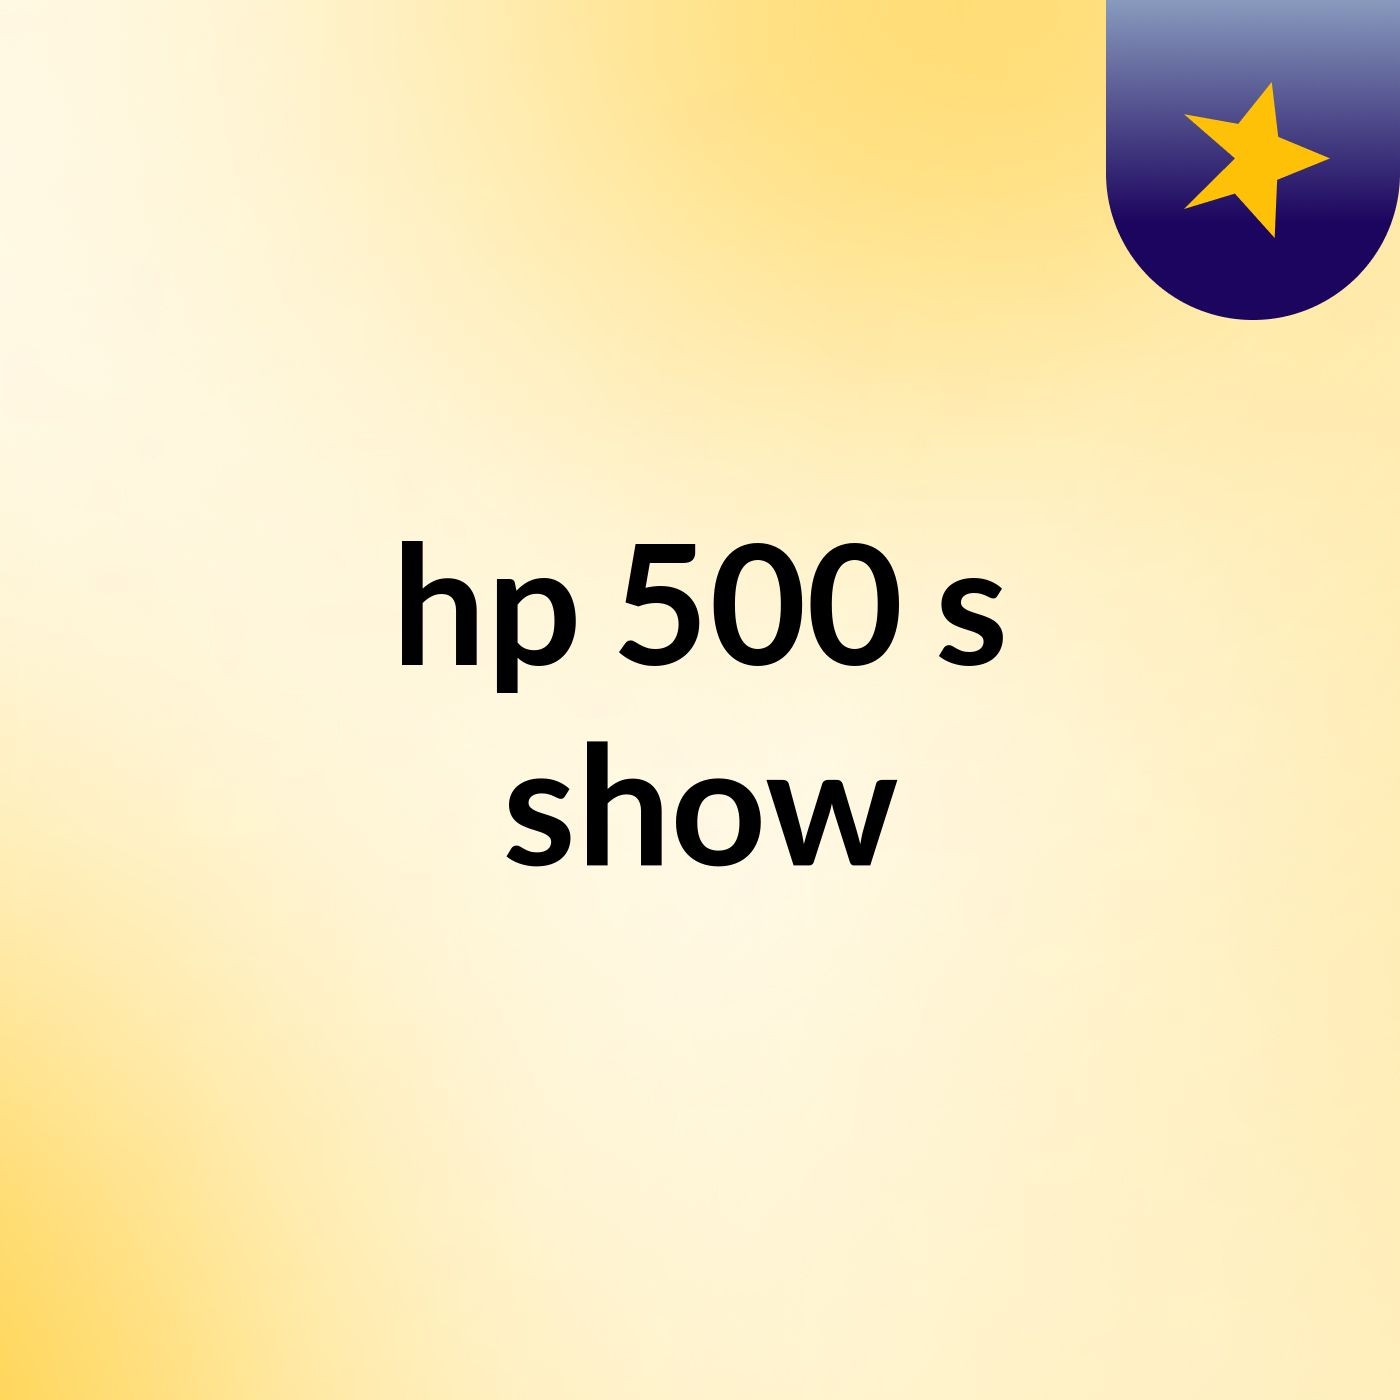 hp 500's show